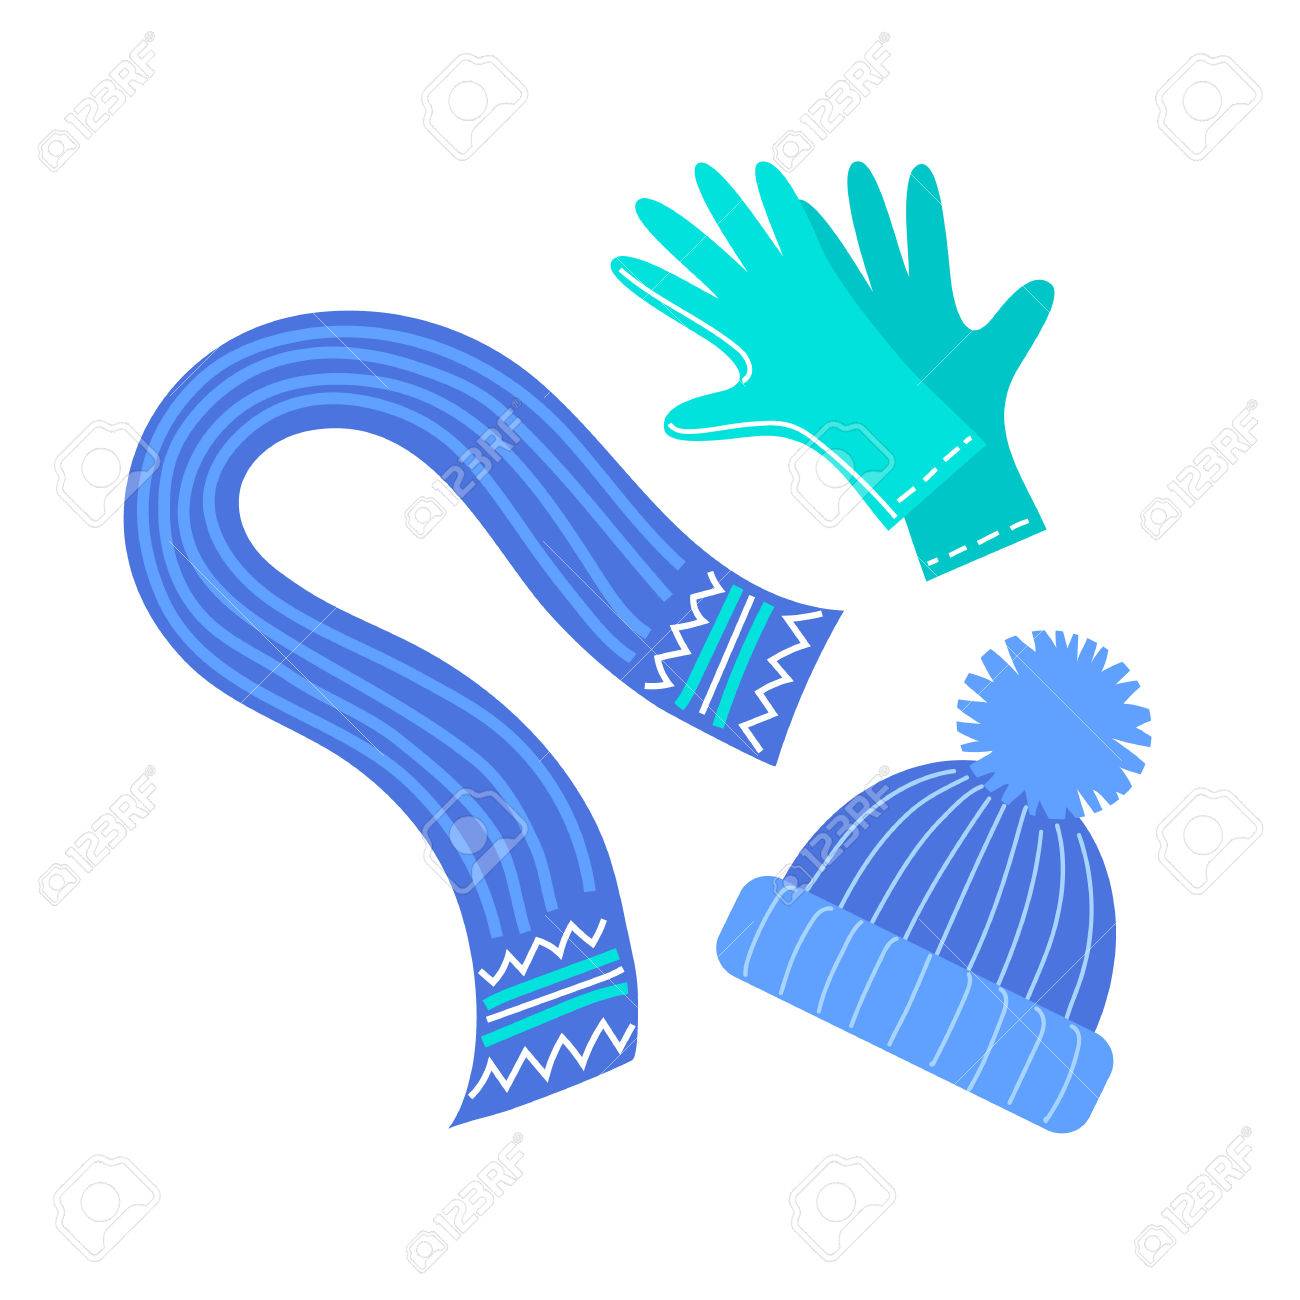 Free Scarf Clipart hat, Download Free Clip Art on Owips